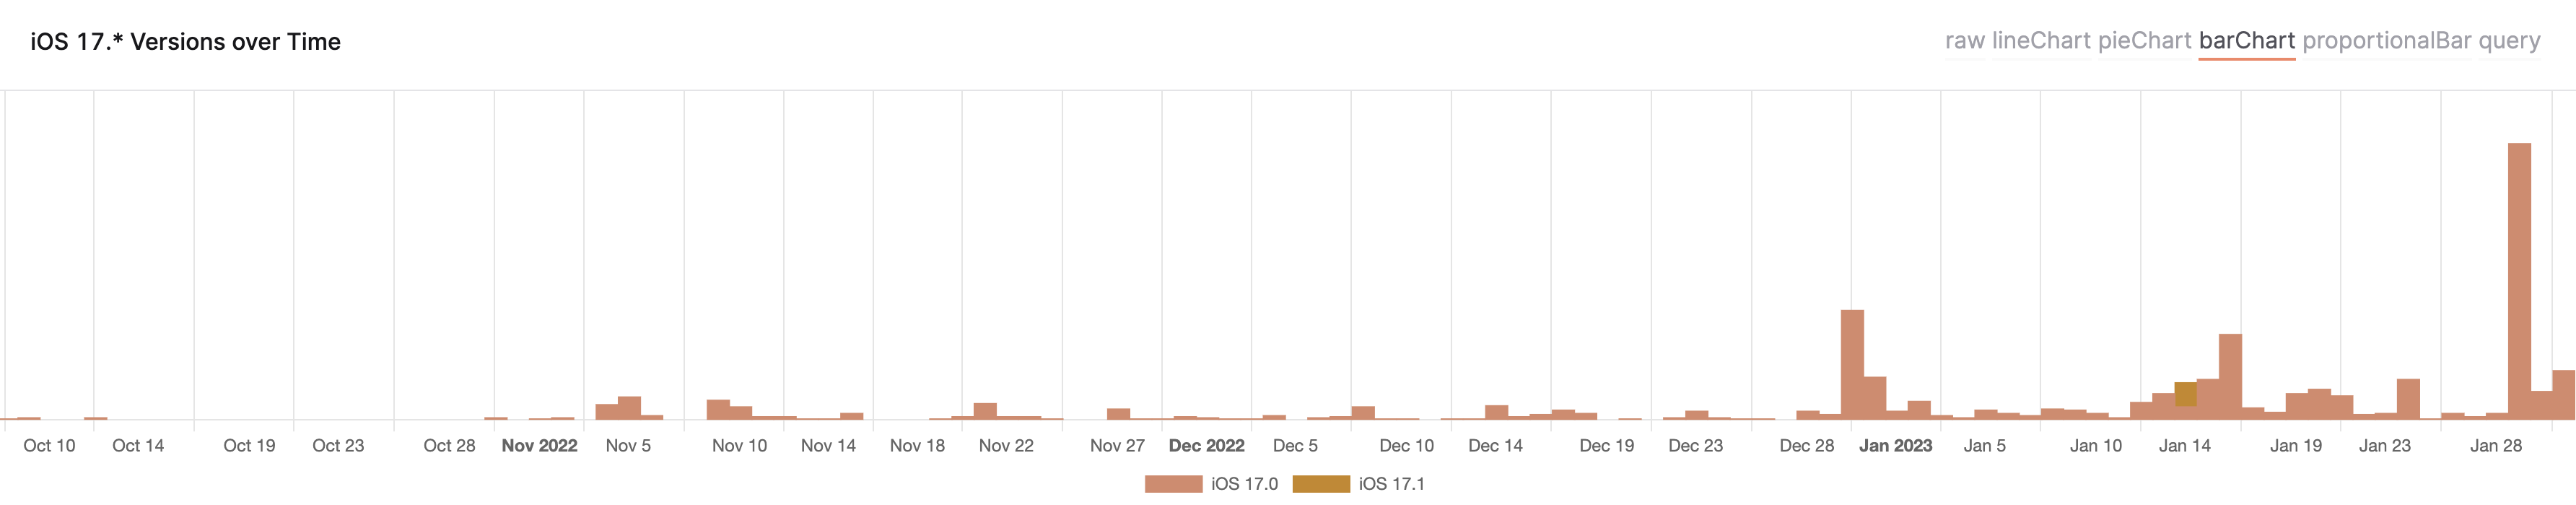 A chart of iOS 17 signals in TelemetryDeck. There are notable bumps around Jan 1, Jan 14, and Jan 28